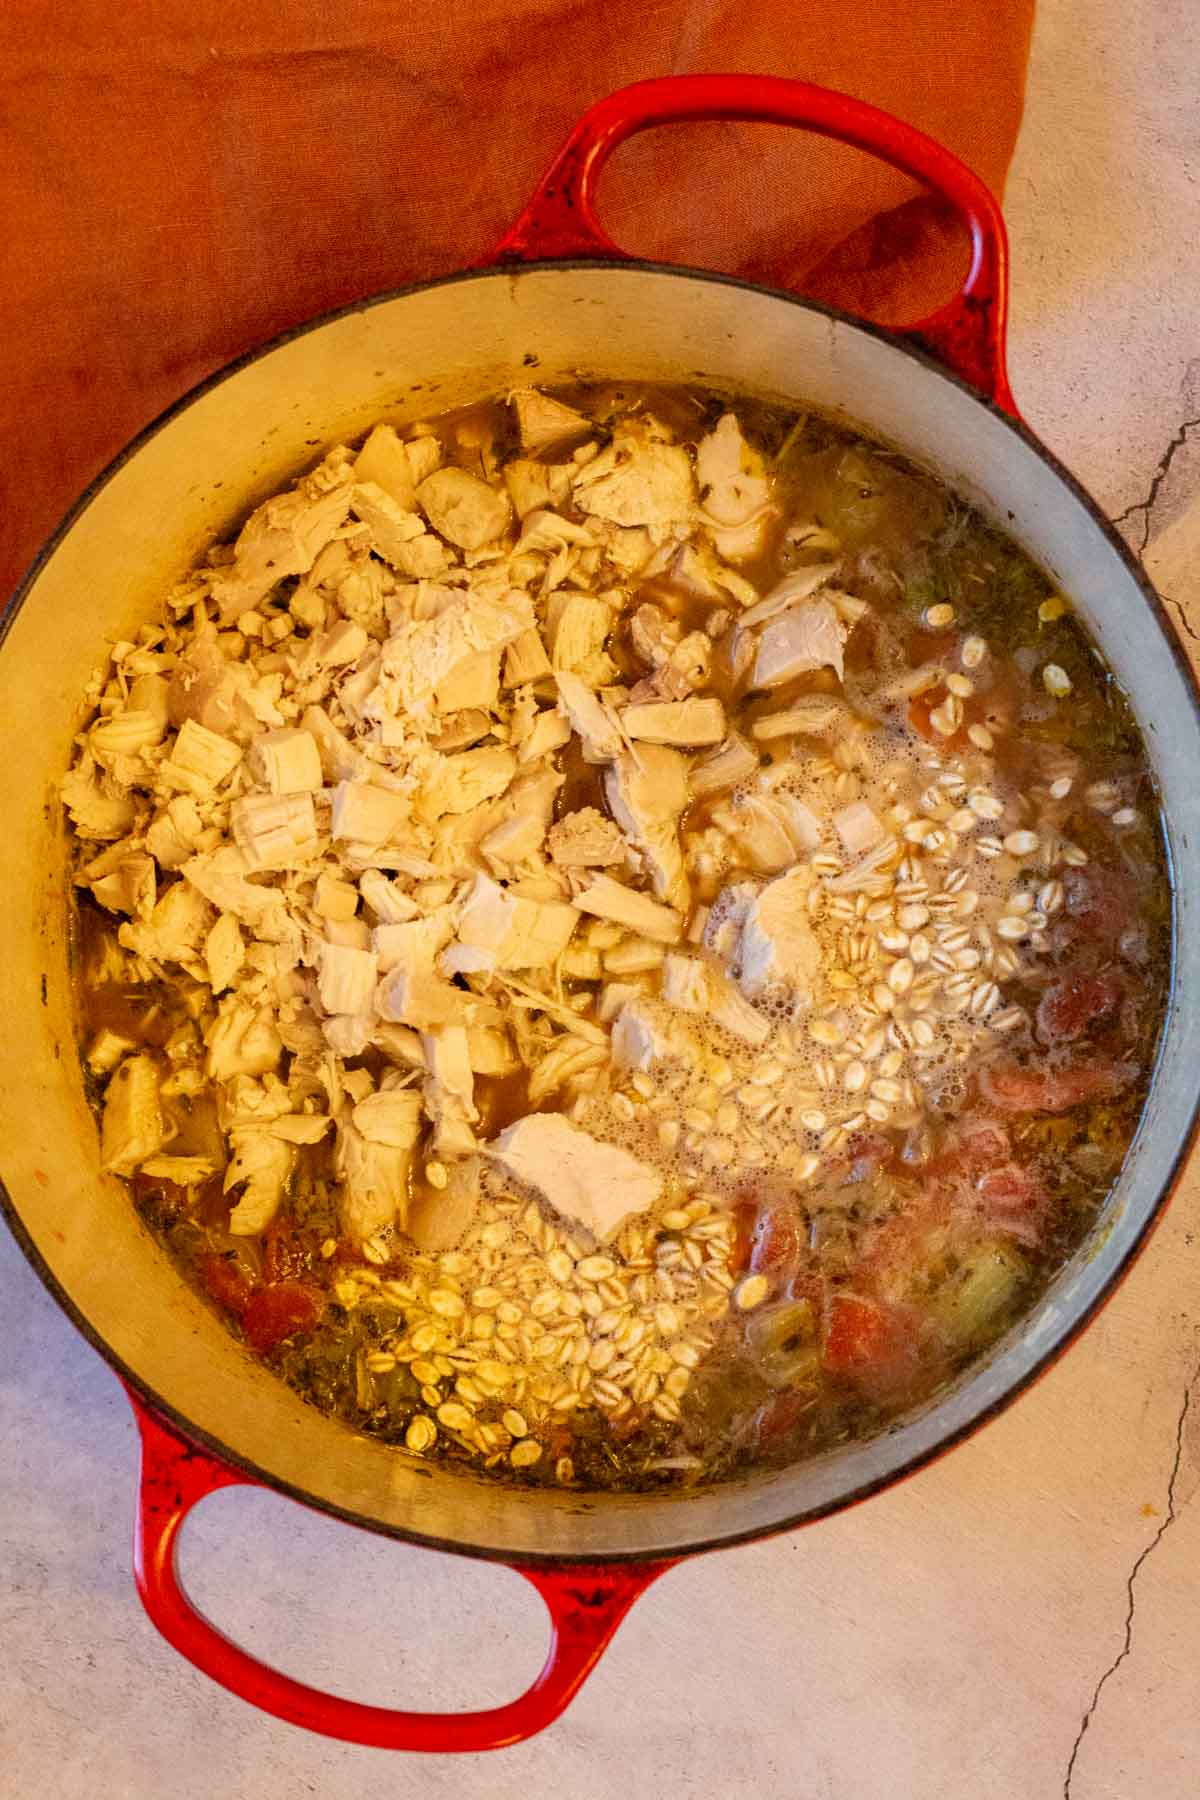 Adding turkey and quick cooking barley to lentil soup.